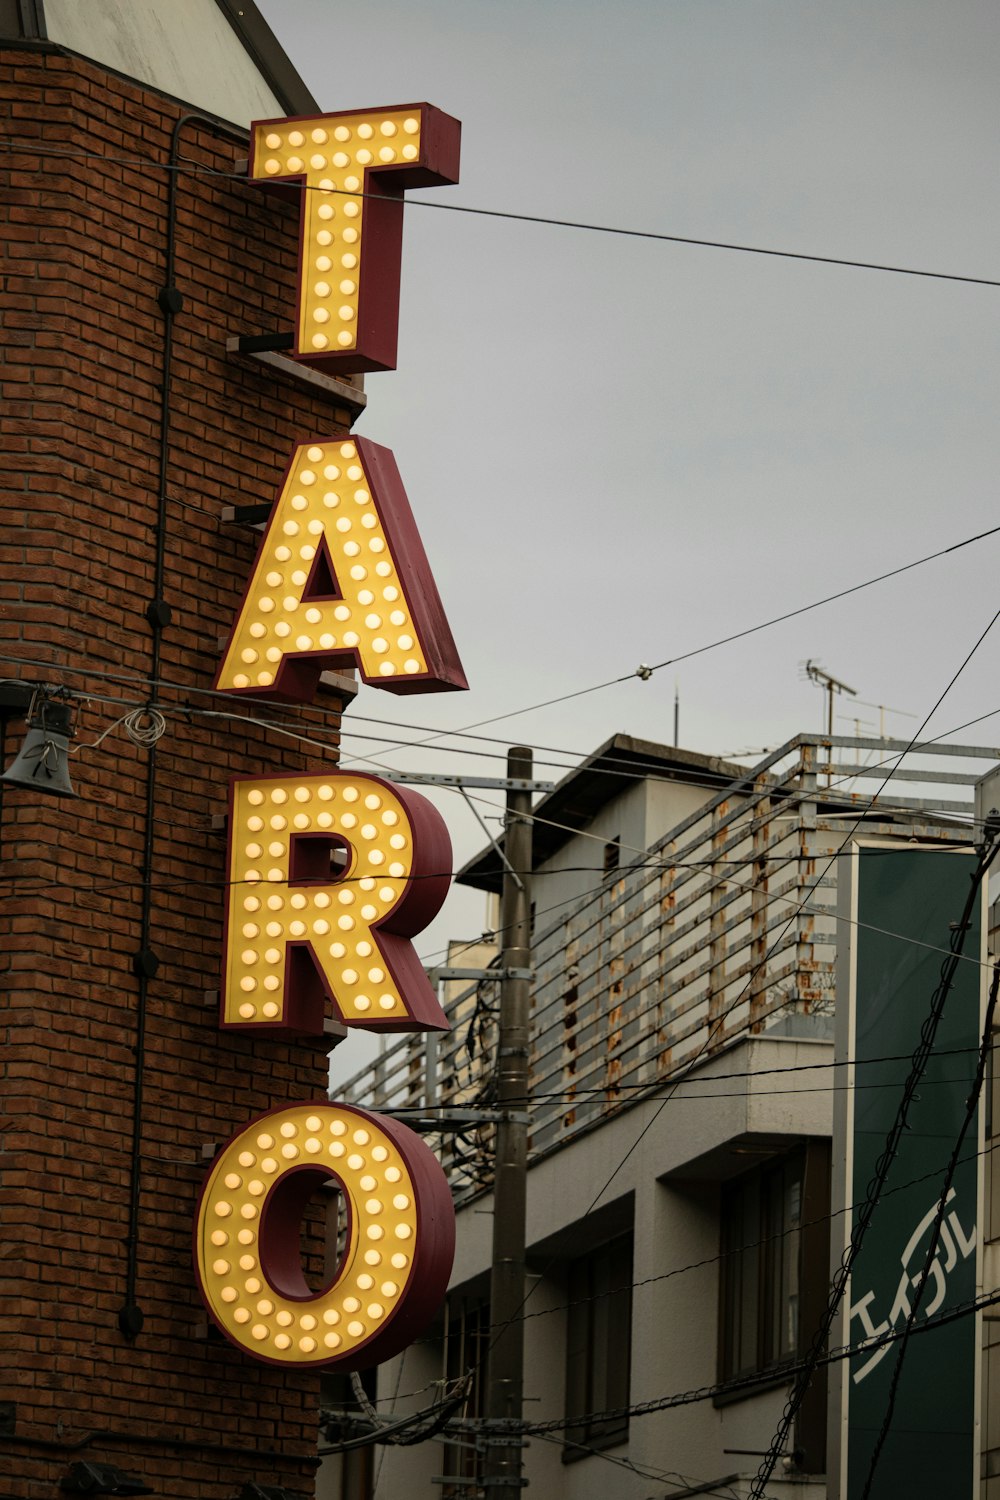 a large marquee sign on the side of a building